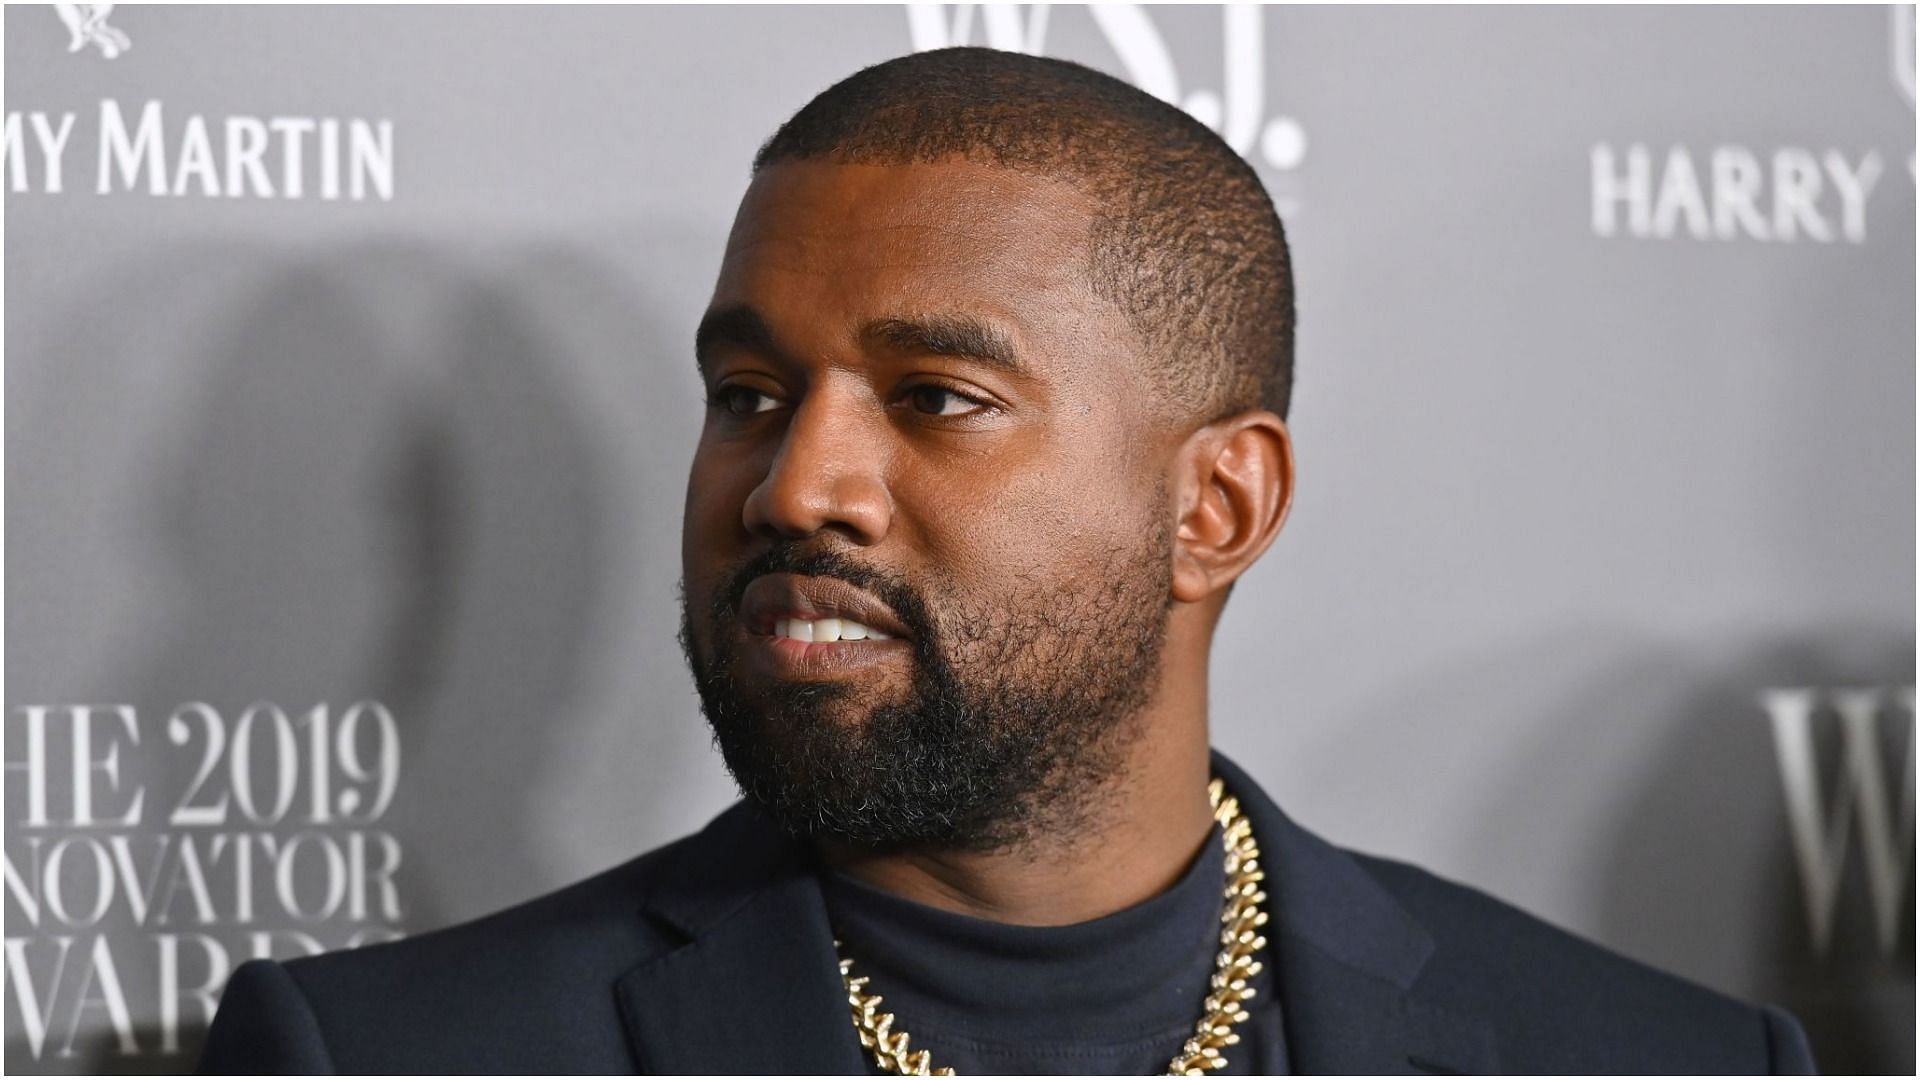 Kanye West called himself the richest black man in the world (Image via Angela Weiss/Getty Images)